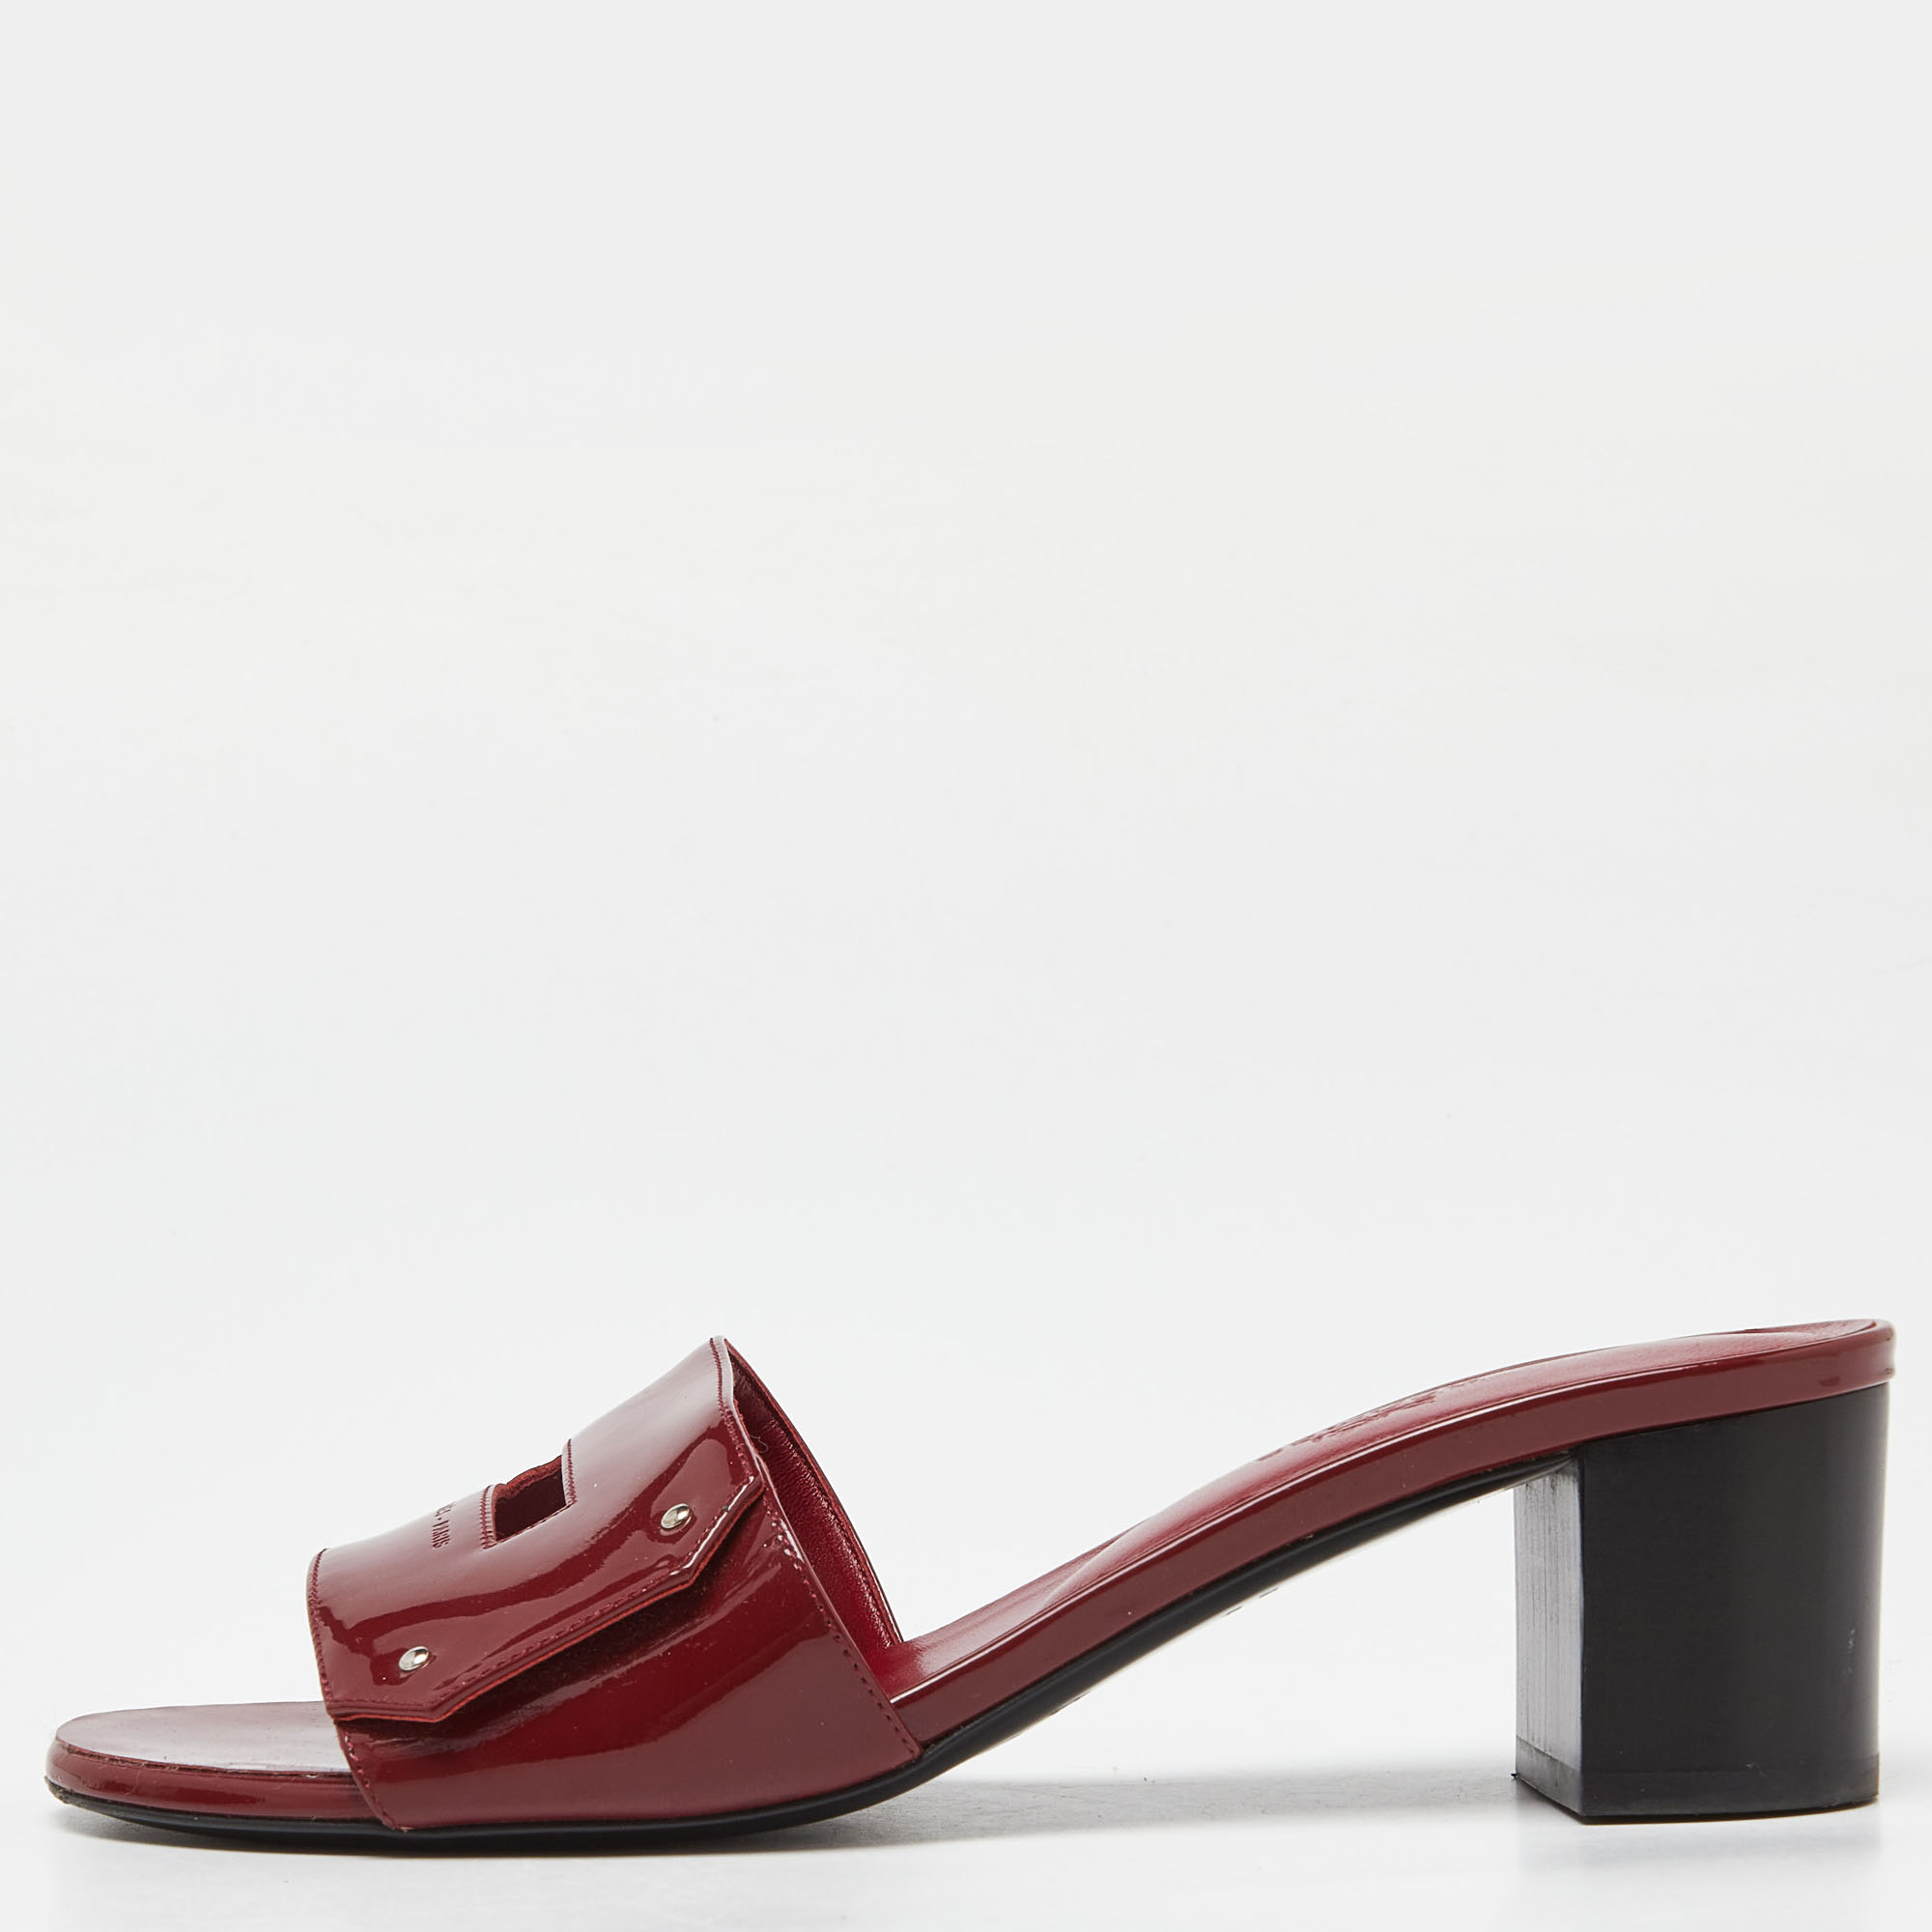 Pre-owned Hermes Burgundy Patent Leather Very Slide Sandals Size 37